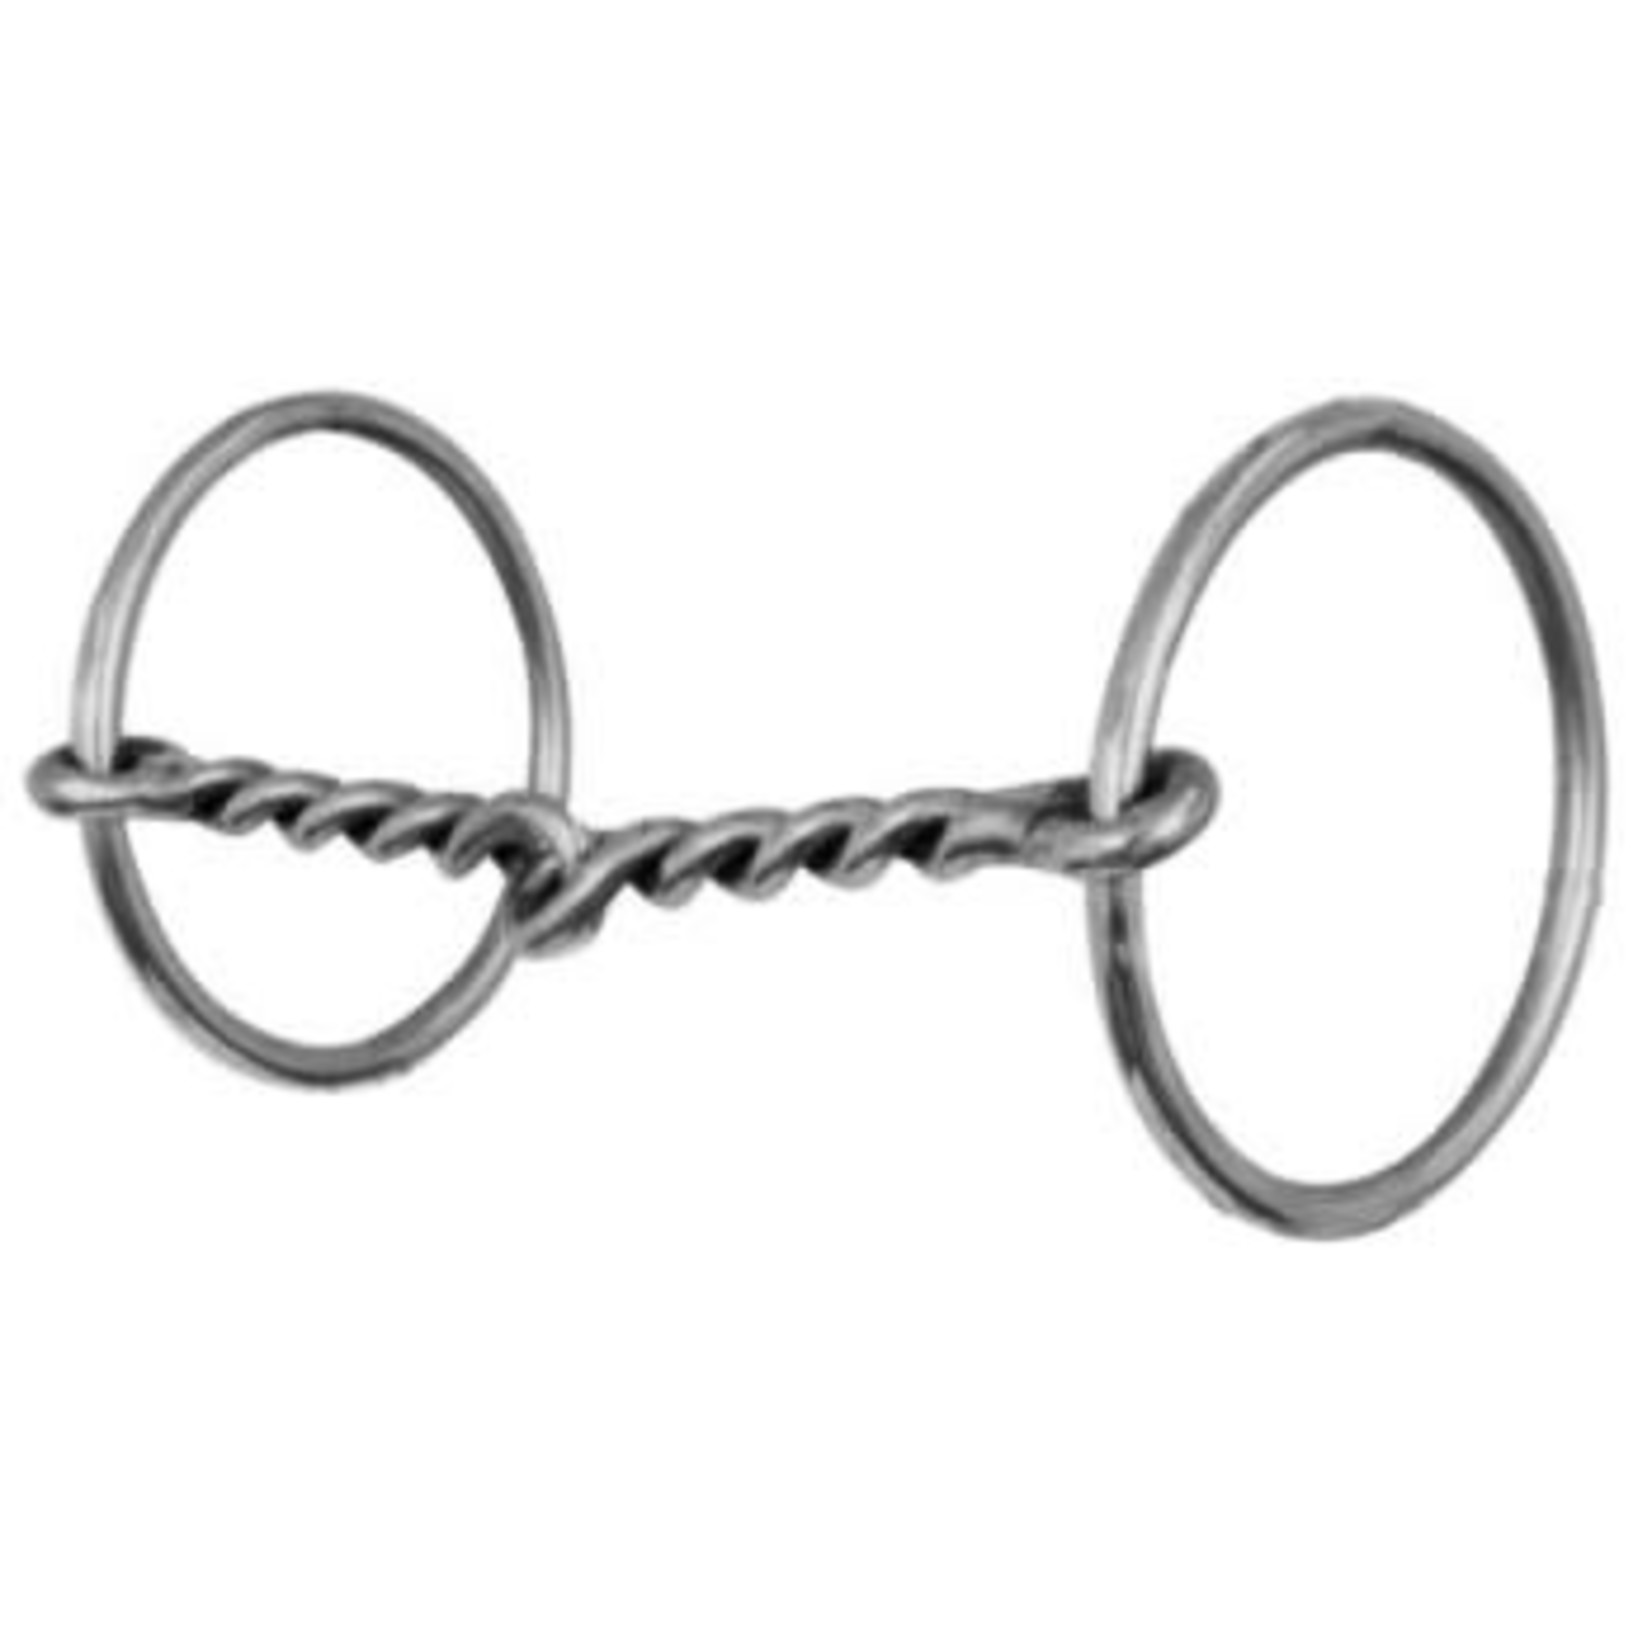 Select Sweet Iron Twisted Loose Ring Snaffle